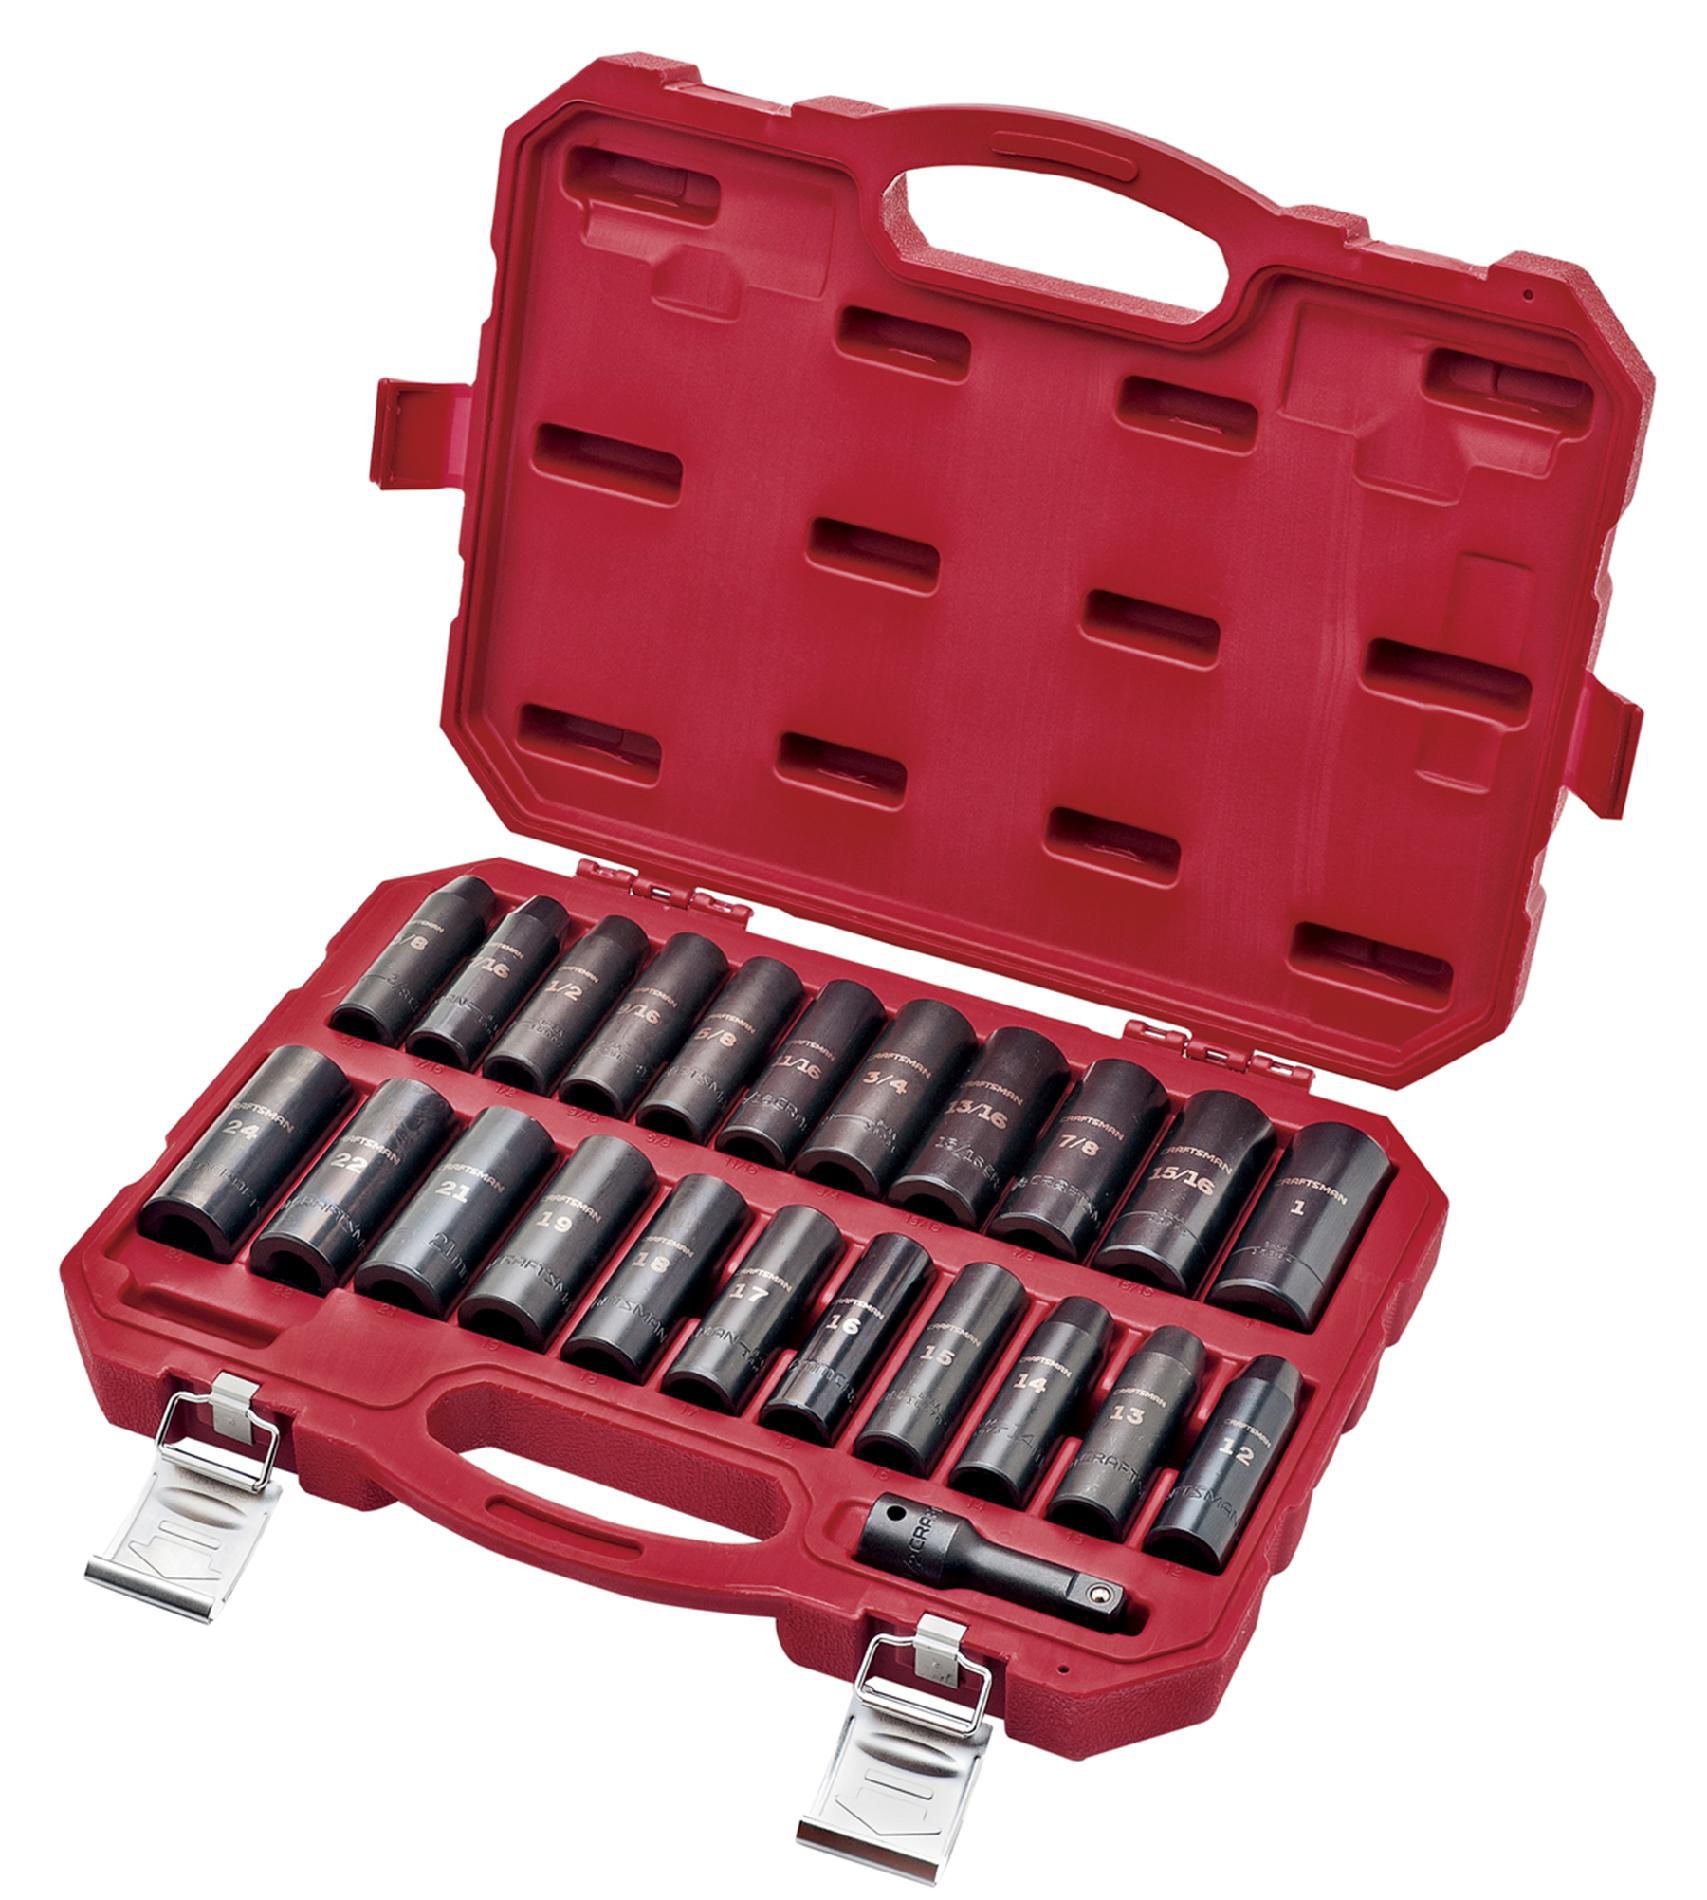 Craftsman 66 Piece Tool Set Top Sellers, 54% OFF | www.hcb.cat